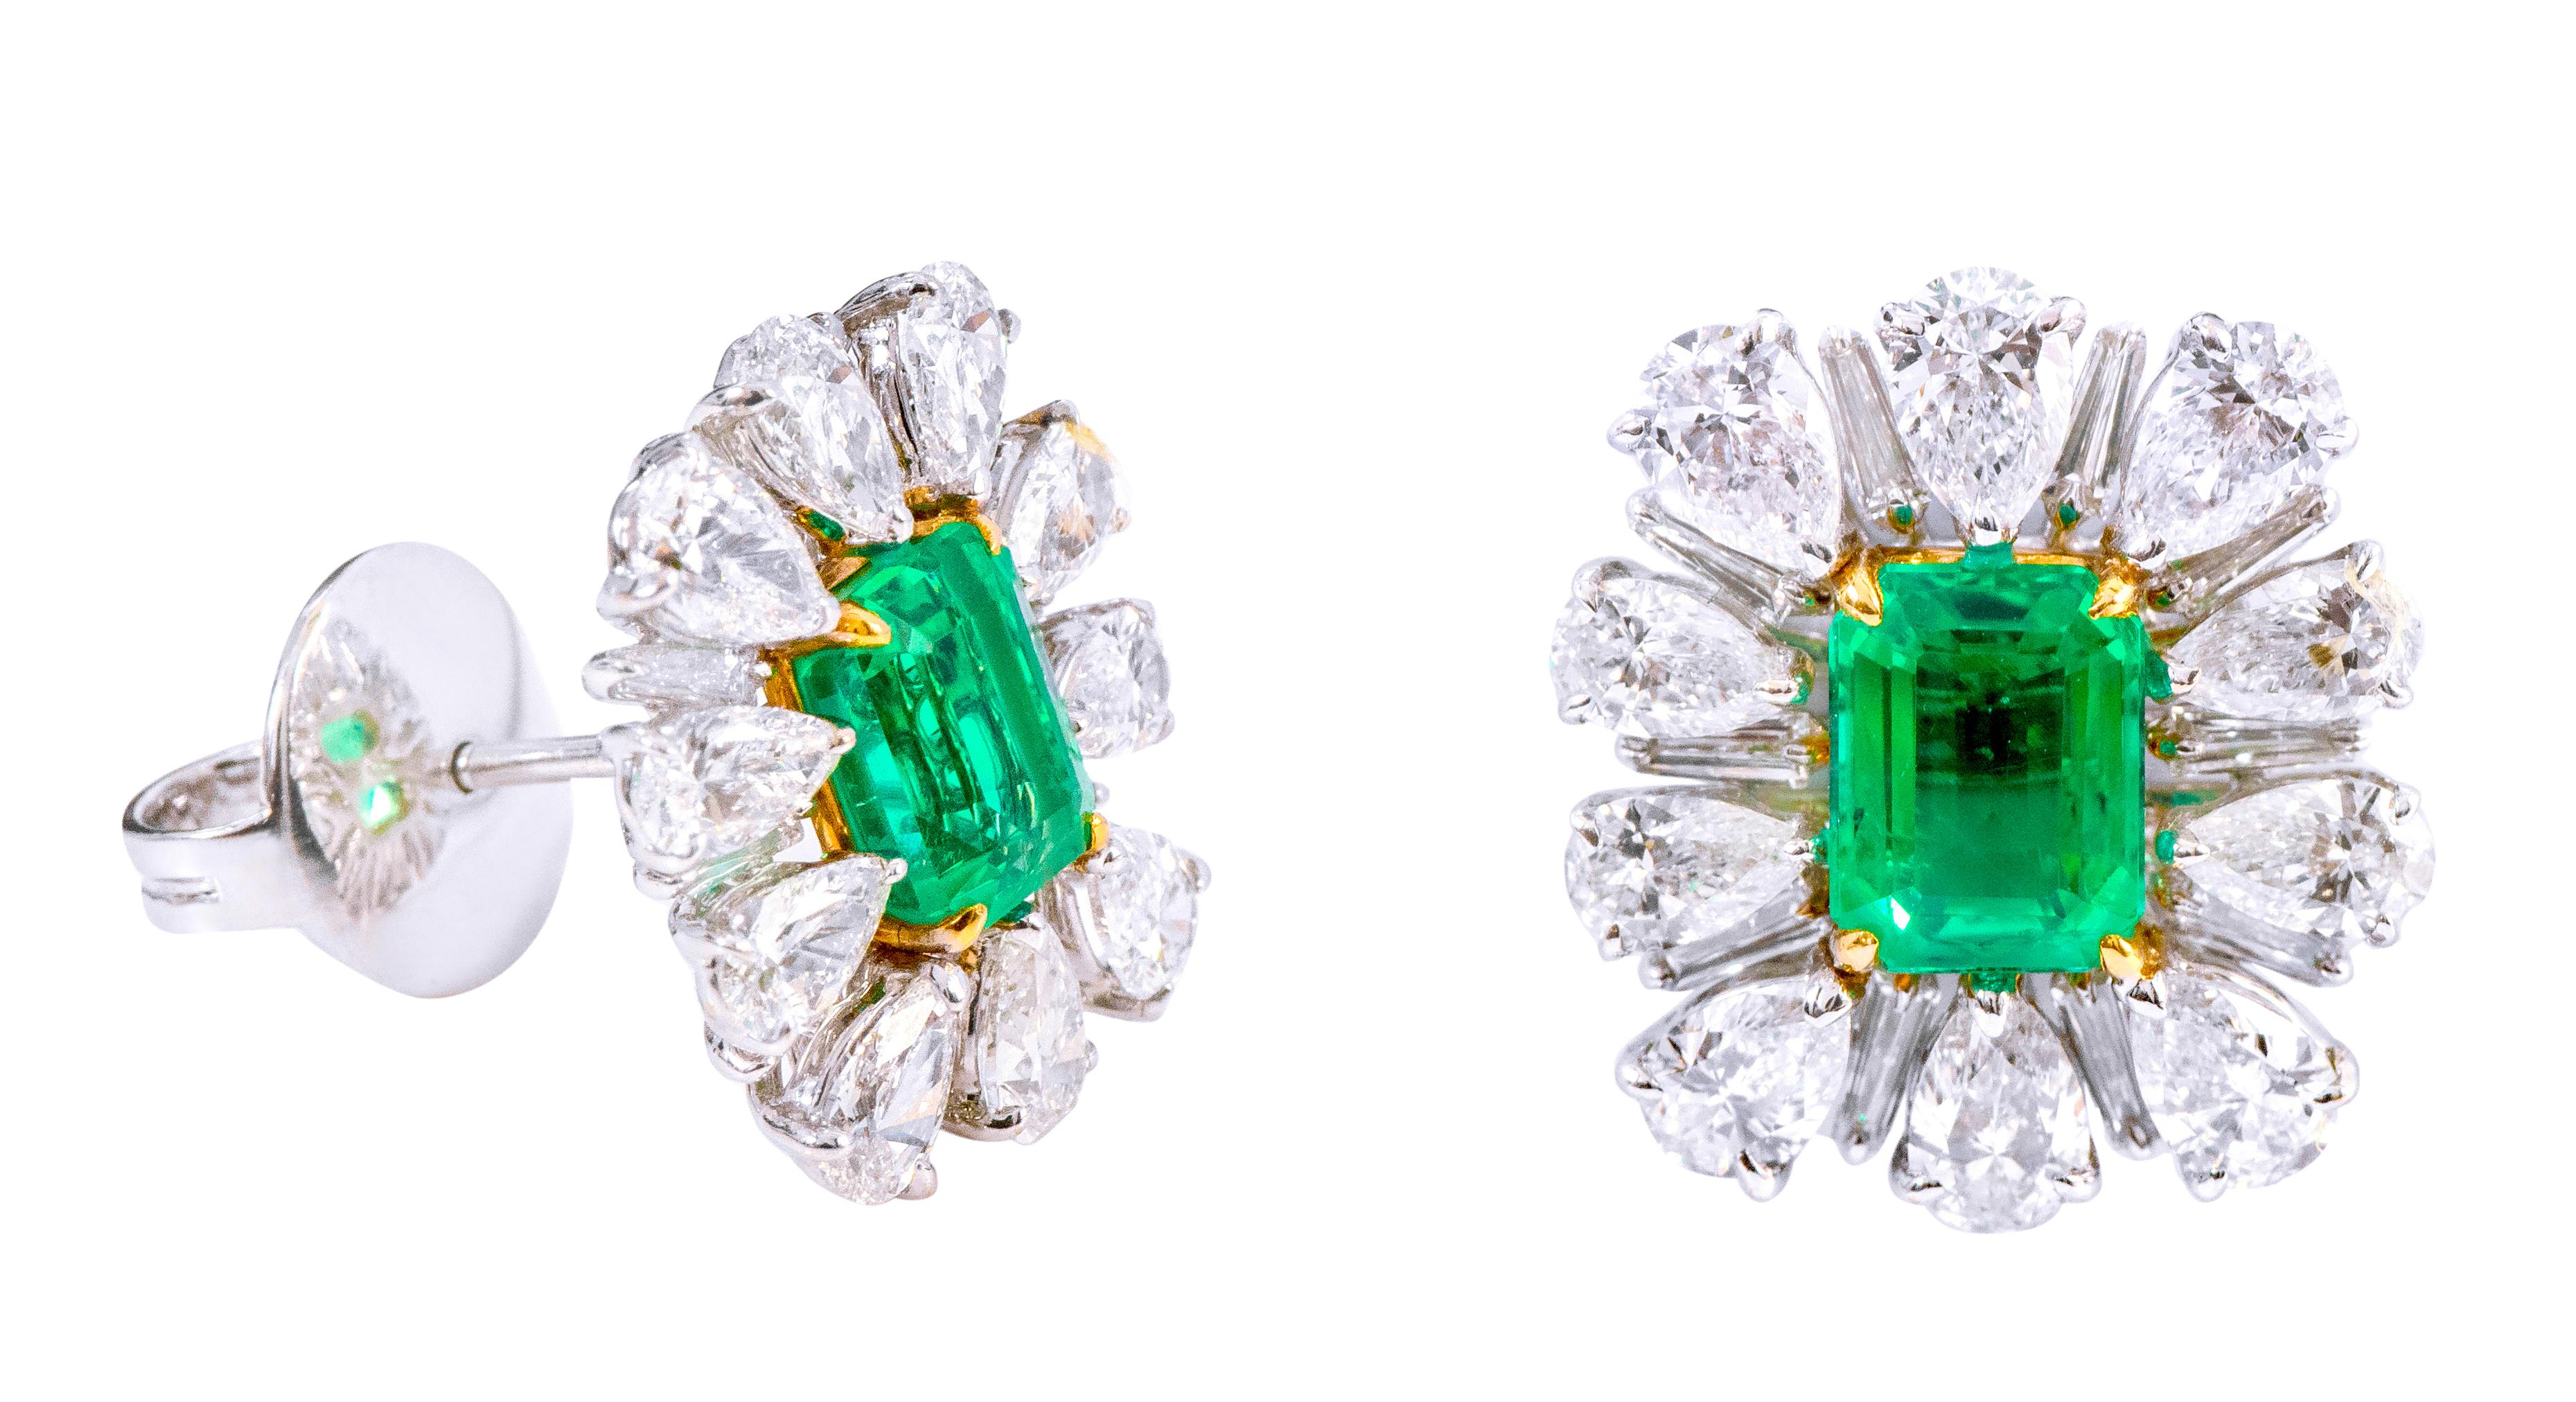 18 Karat White Gold 6.80 Carat Natural Emerald and Diamond Cluster Stud Earrings

This impressive vibrant green emerald and diamond earring is elegant. The solitaire emerald cut emerald is magnificently surrounded with a formed cluster of